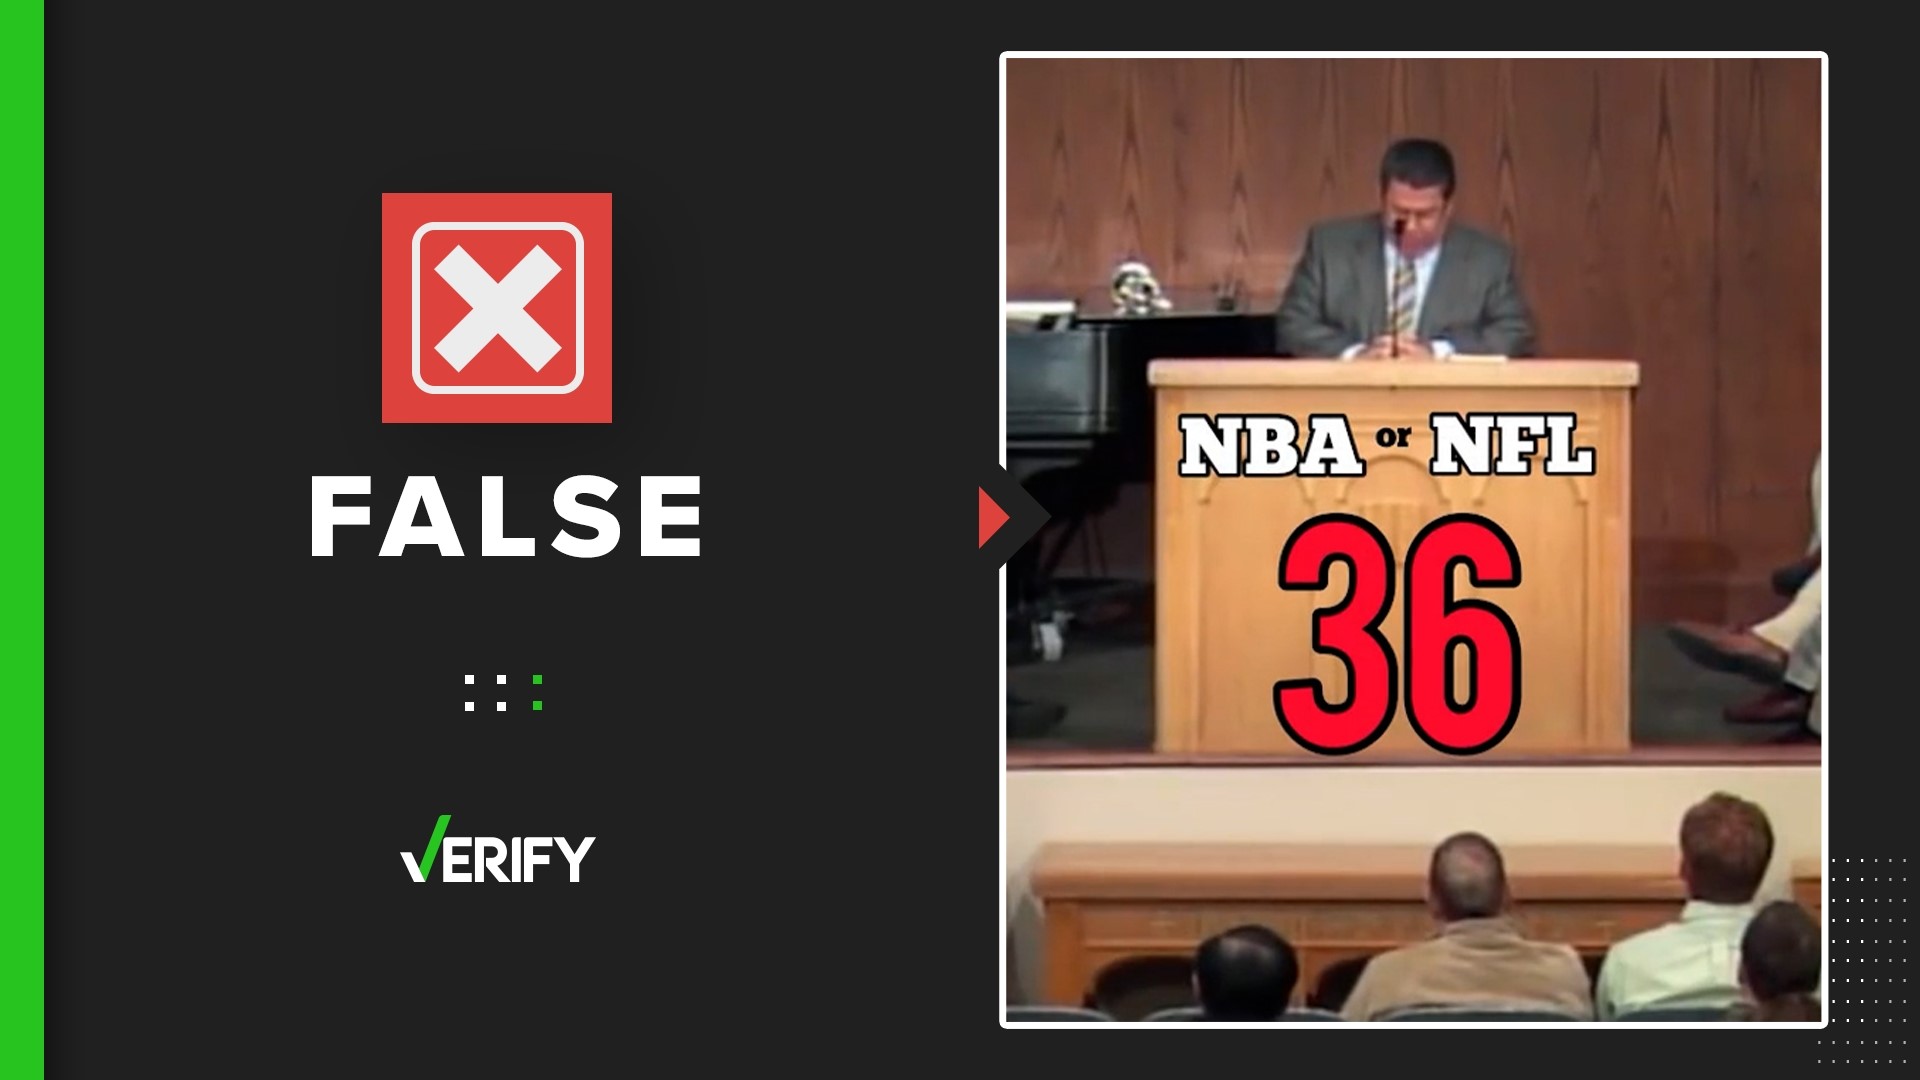 The ‘NFL or NBA’ video revives repeatedly debunked statistics about Congress that were first published in 1999.